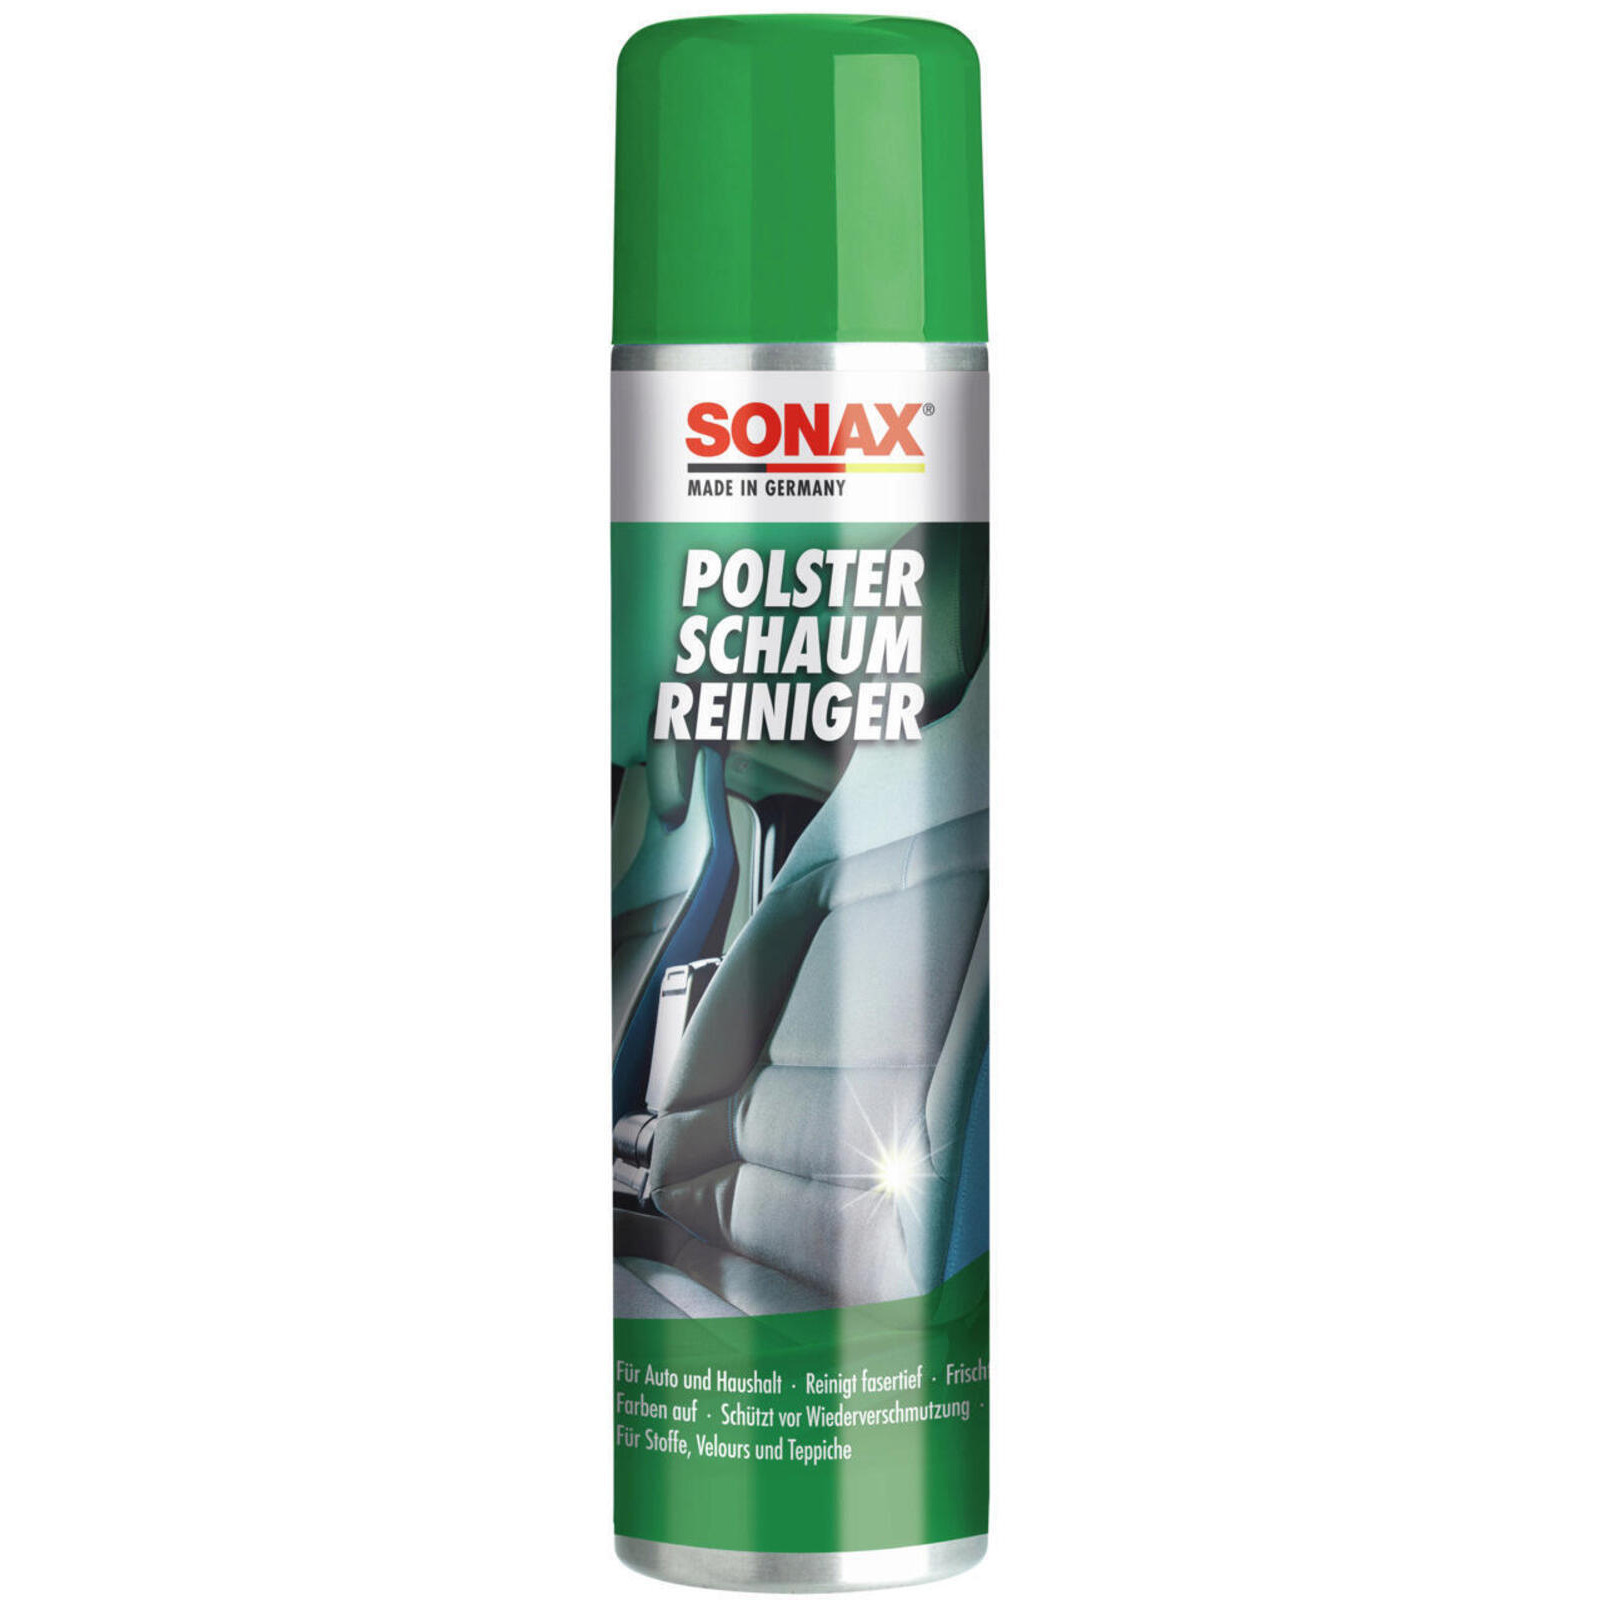 SONAX Textile / Carpet Cleaner Foam upholstery cleaner